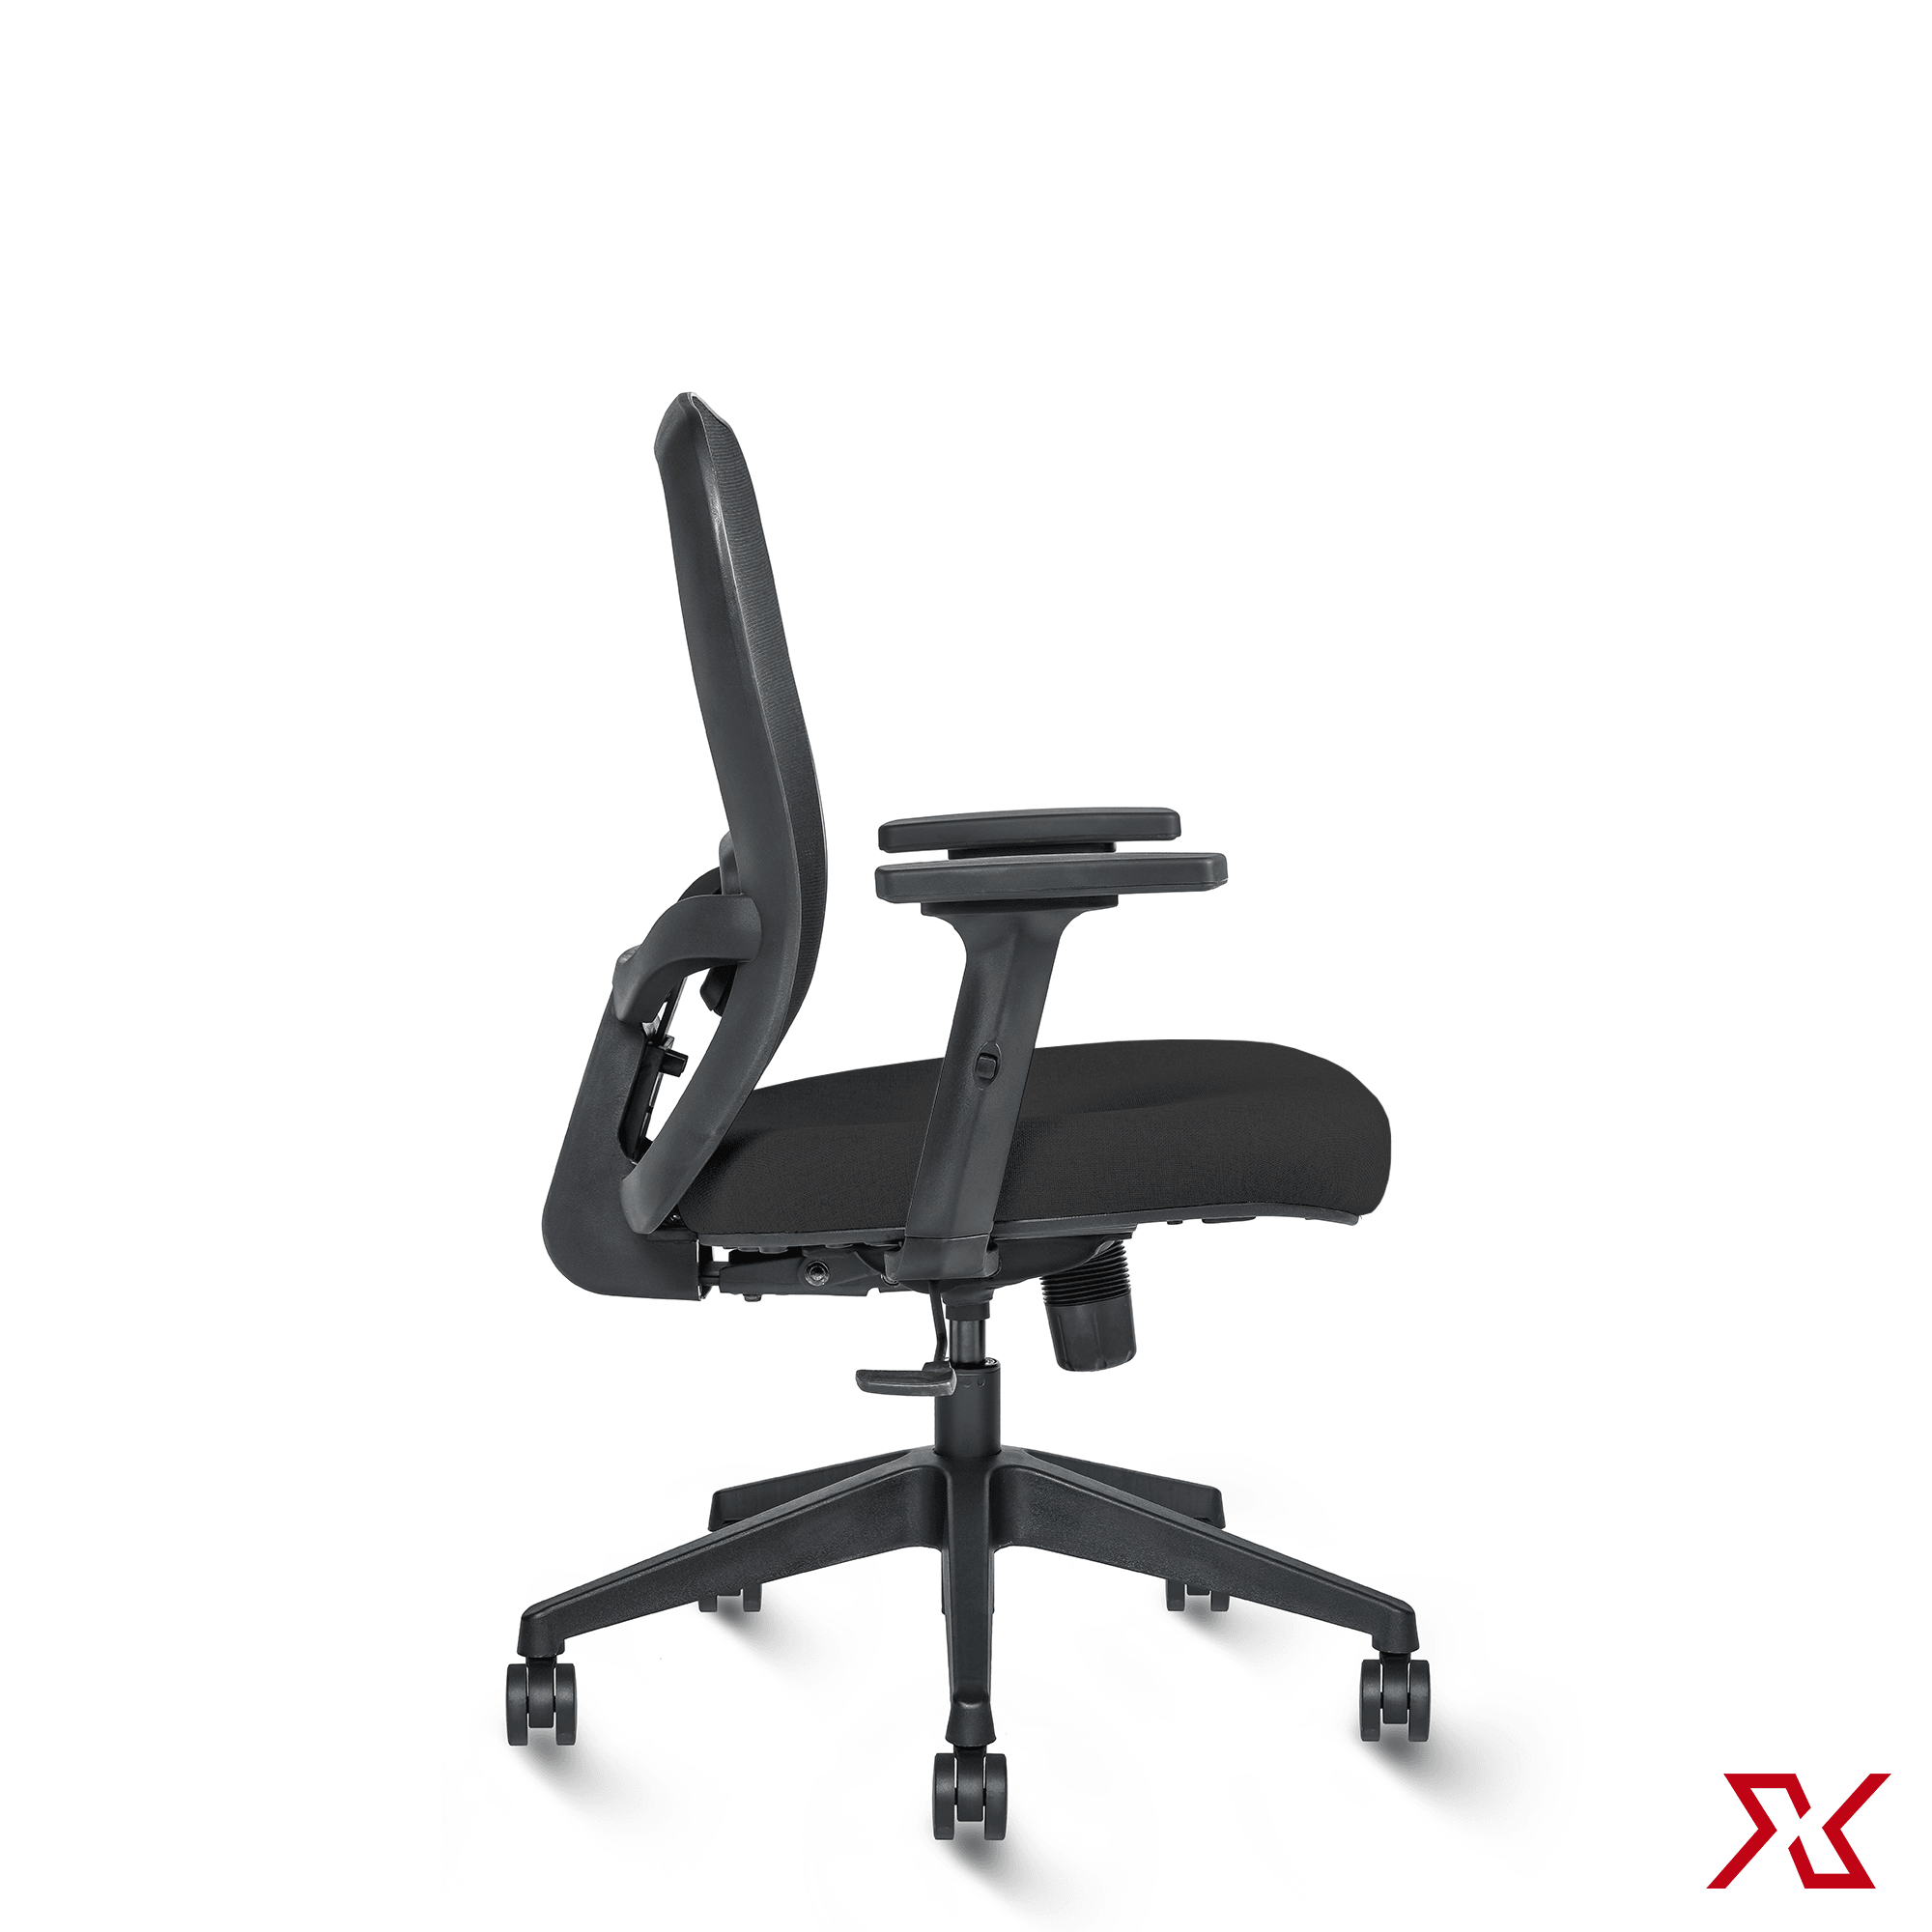 DUNE Medium Back LX (Black Chair) - Exclusiff Seating Sytems